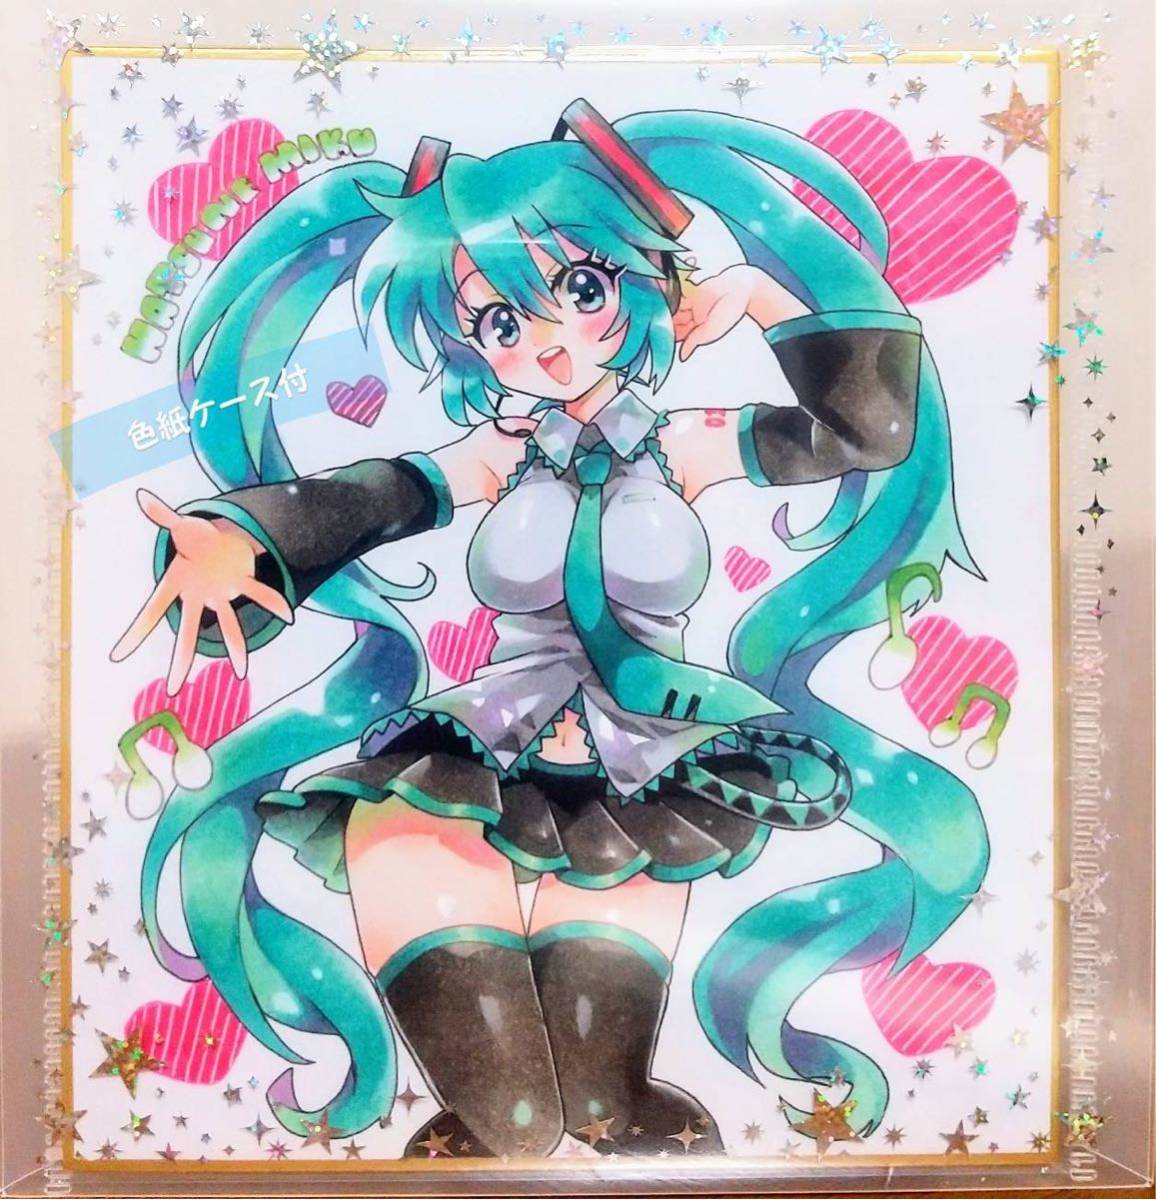 Vocaloid 初音ミク オリジナルイラスト原画 ミニ色紙 色紙ケース付 Product Details Yahoo Auctions Japan Proxy Bidding And Shopping Service From Japan